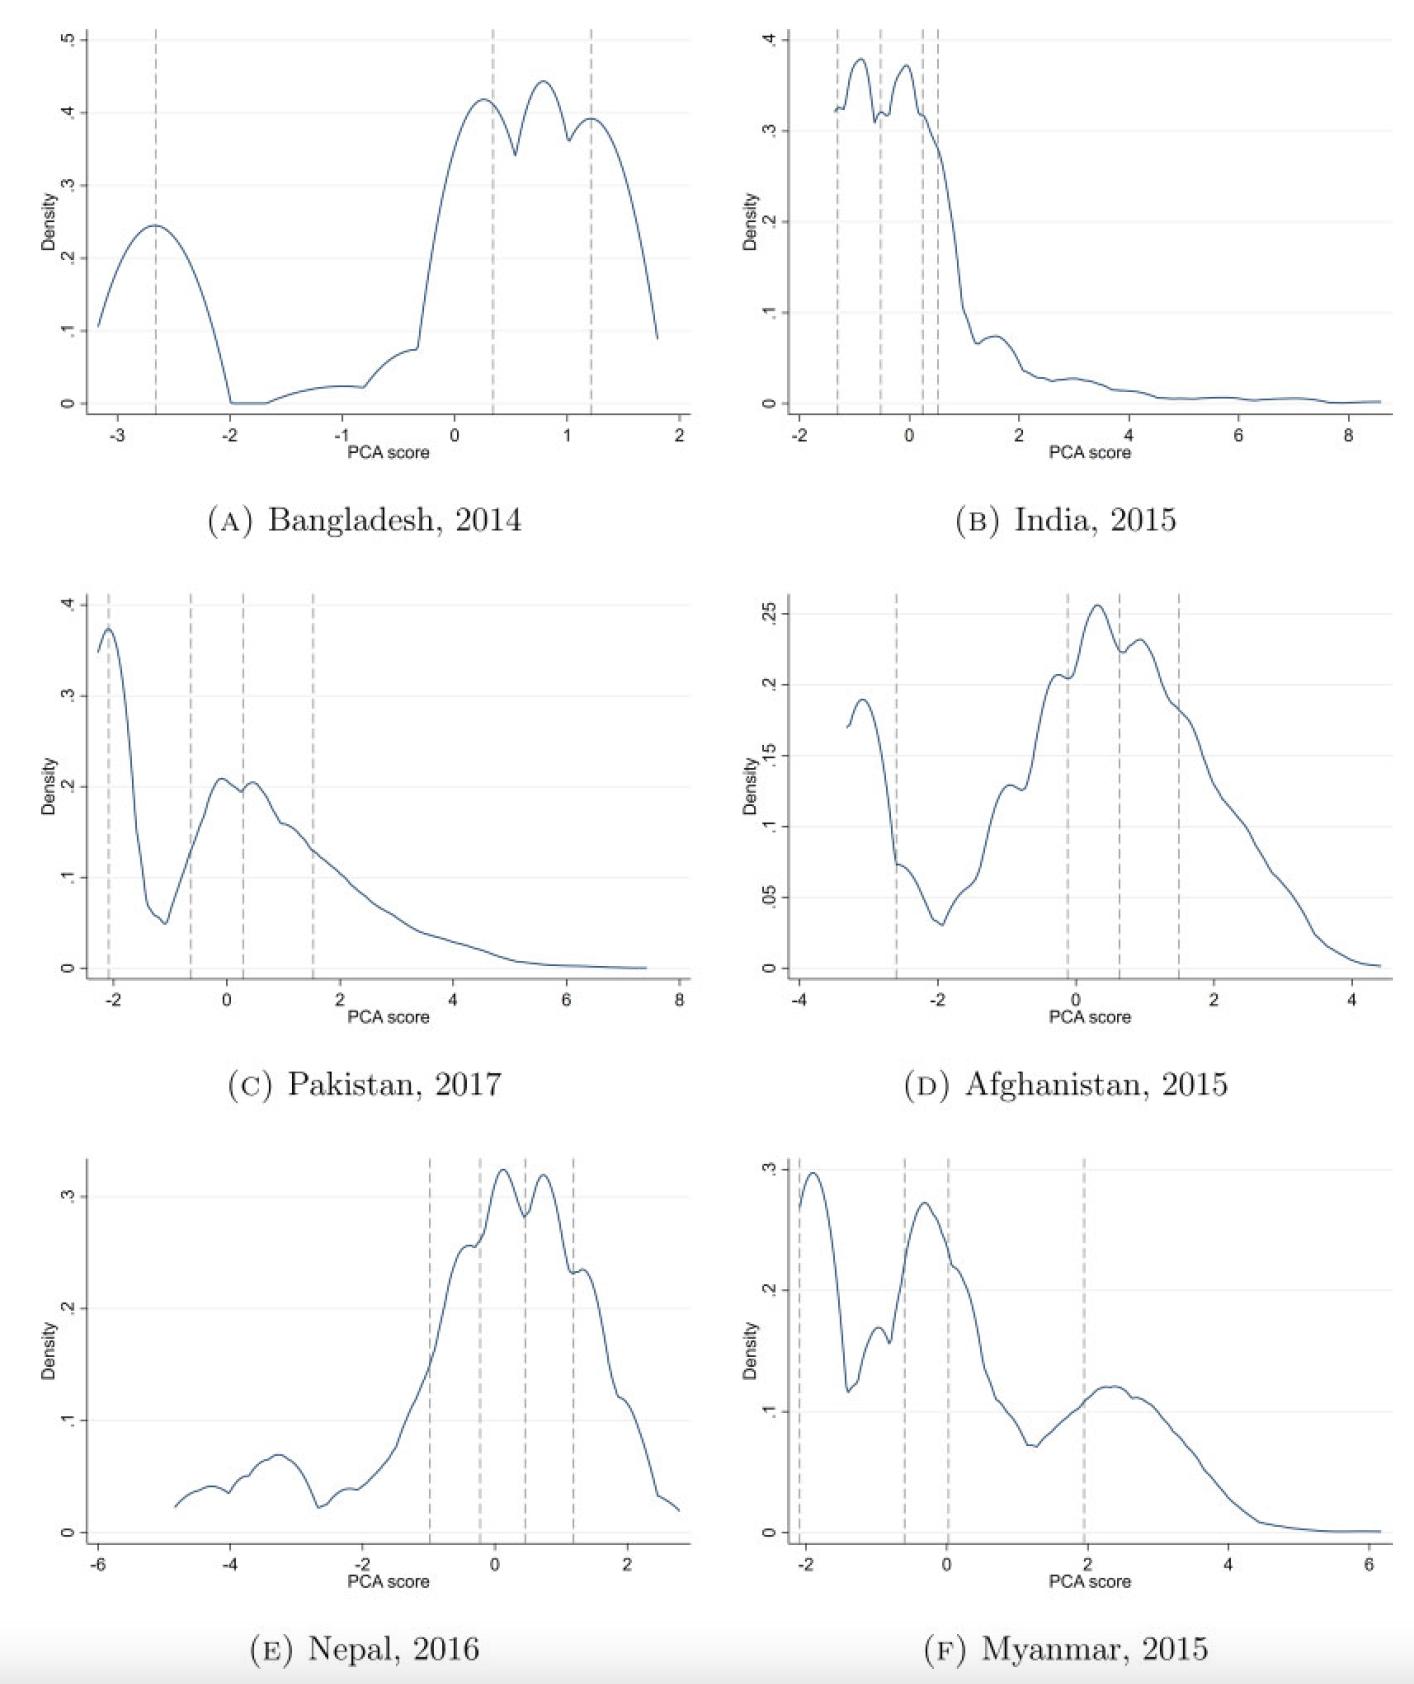 Figure 4 Distribution of agricultural assets for rural households across South Asia